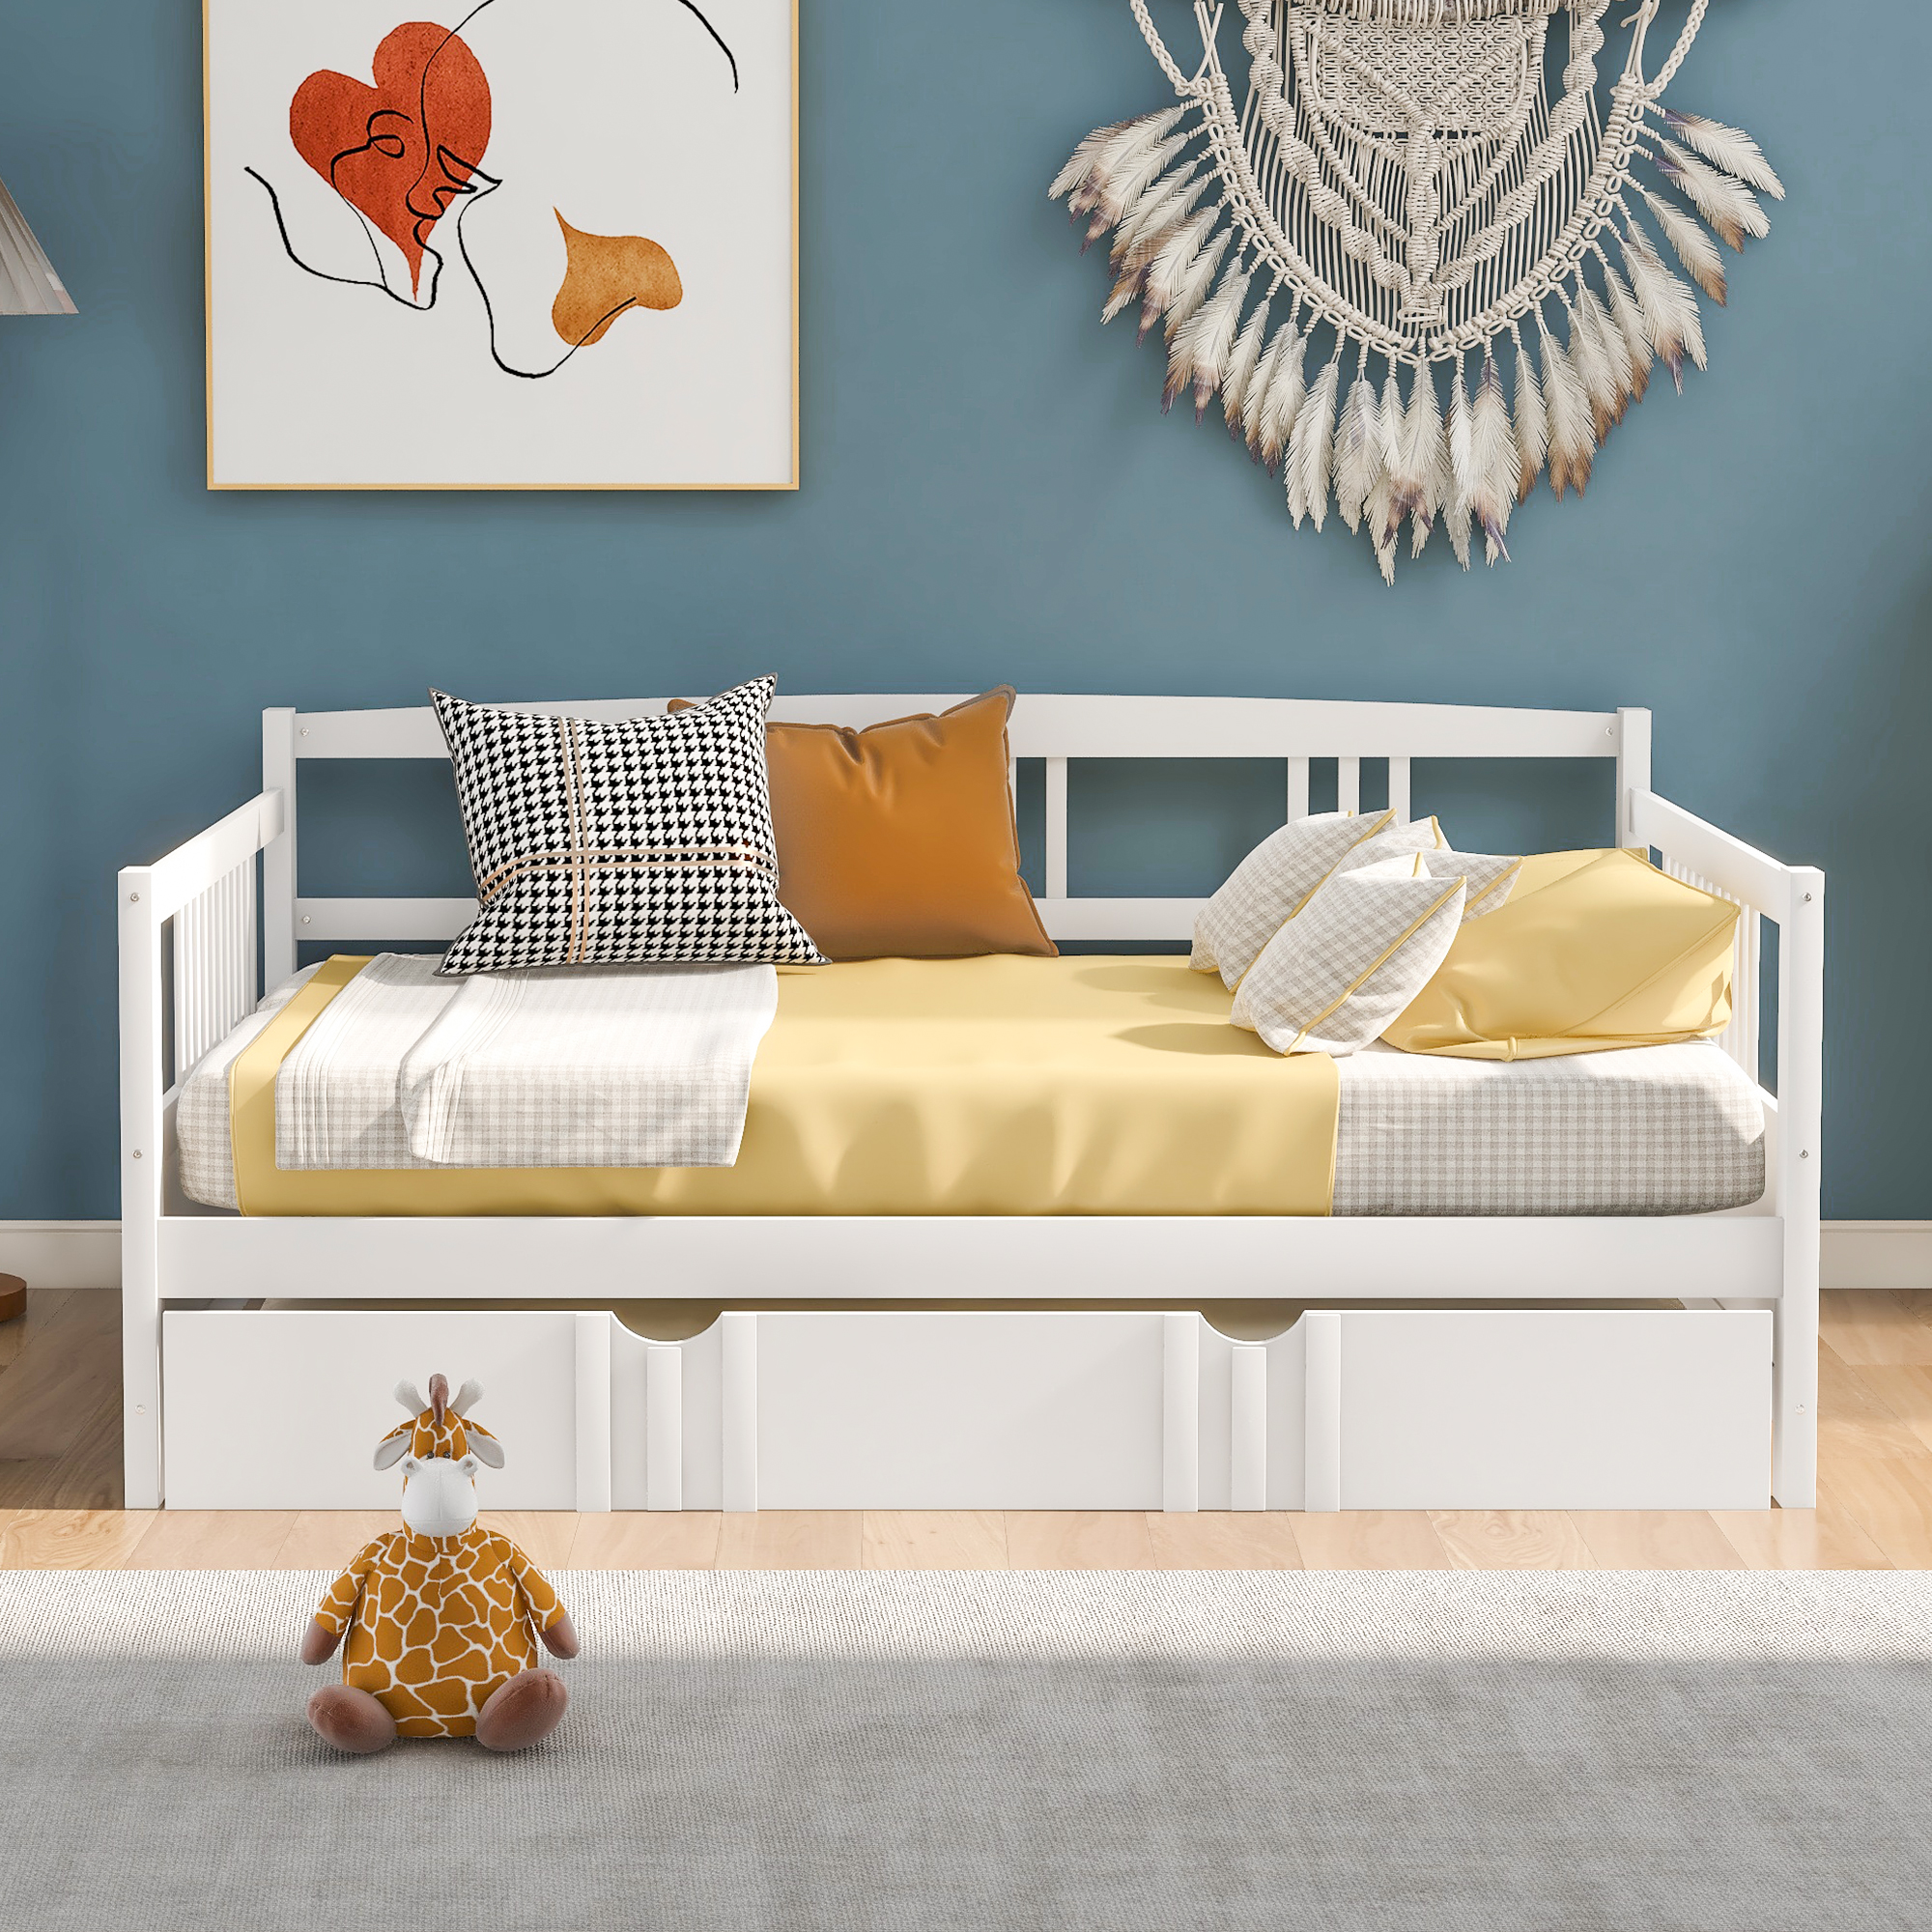 PAPROOS Daybed with Trundle Included, Full Size Daybed Bed Frame with Pull Out Trundle Bed and Wooden Slats, Solid Wood Sofa Bed Full Daybed, No Box Spring Needed, White - image 2 of 12